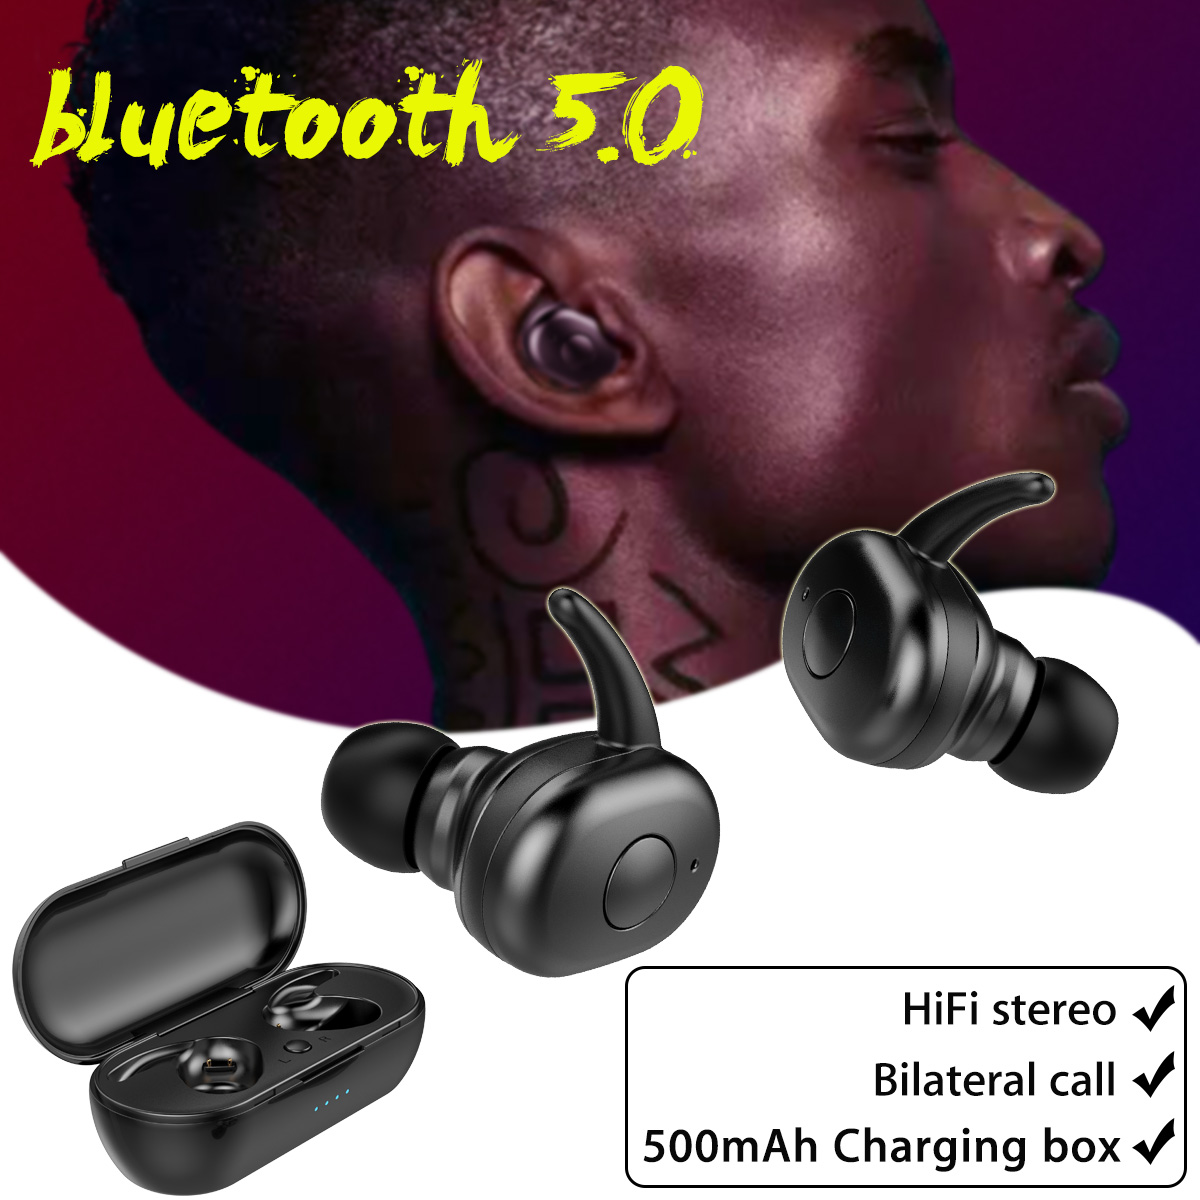 Bluetooth/ Headphones【12/ Hours/ Talking/ Time】 Most/ Cost-Effective,/ 3D/ Stereo,/ IPX5/ Waterproof,/ for/ Sports,/ Strong/ Bluetooth/ Signal OOO